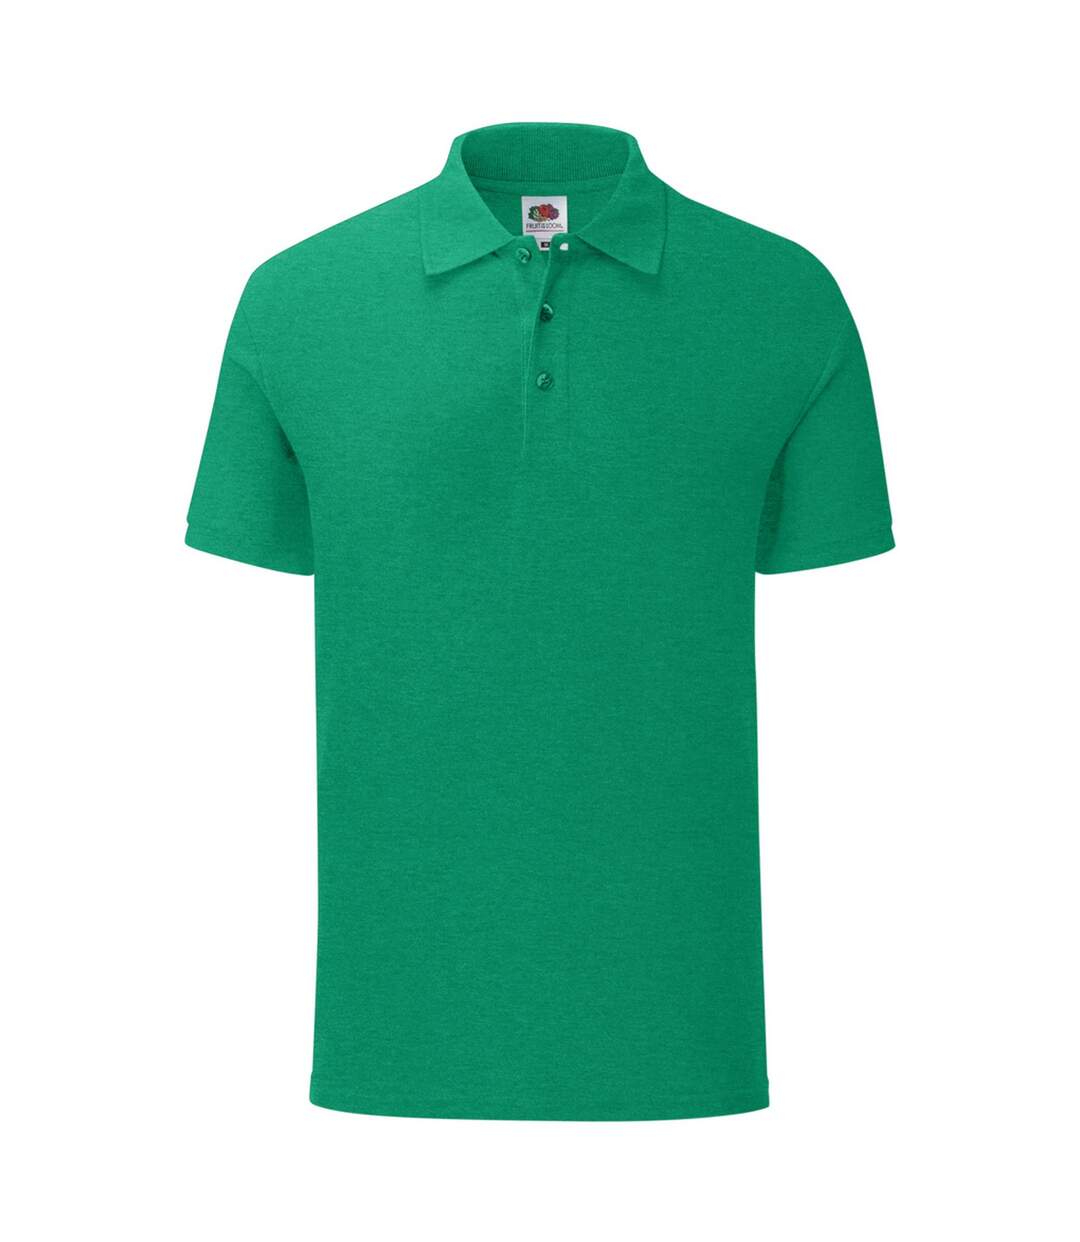 Fruit Of The Loom Mens Iconic Pique Polo Shirt (Heather Green) - UTPC3571